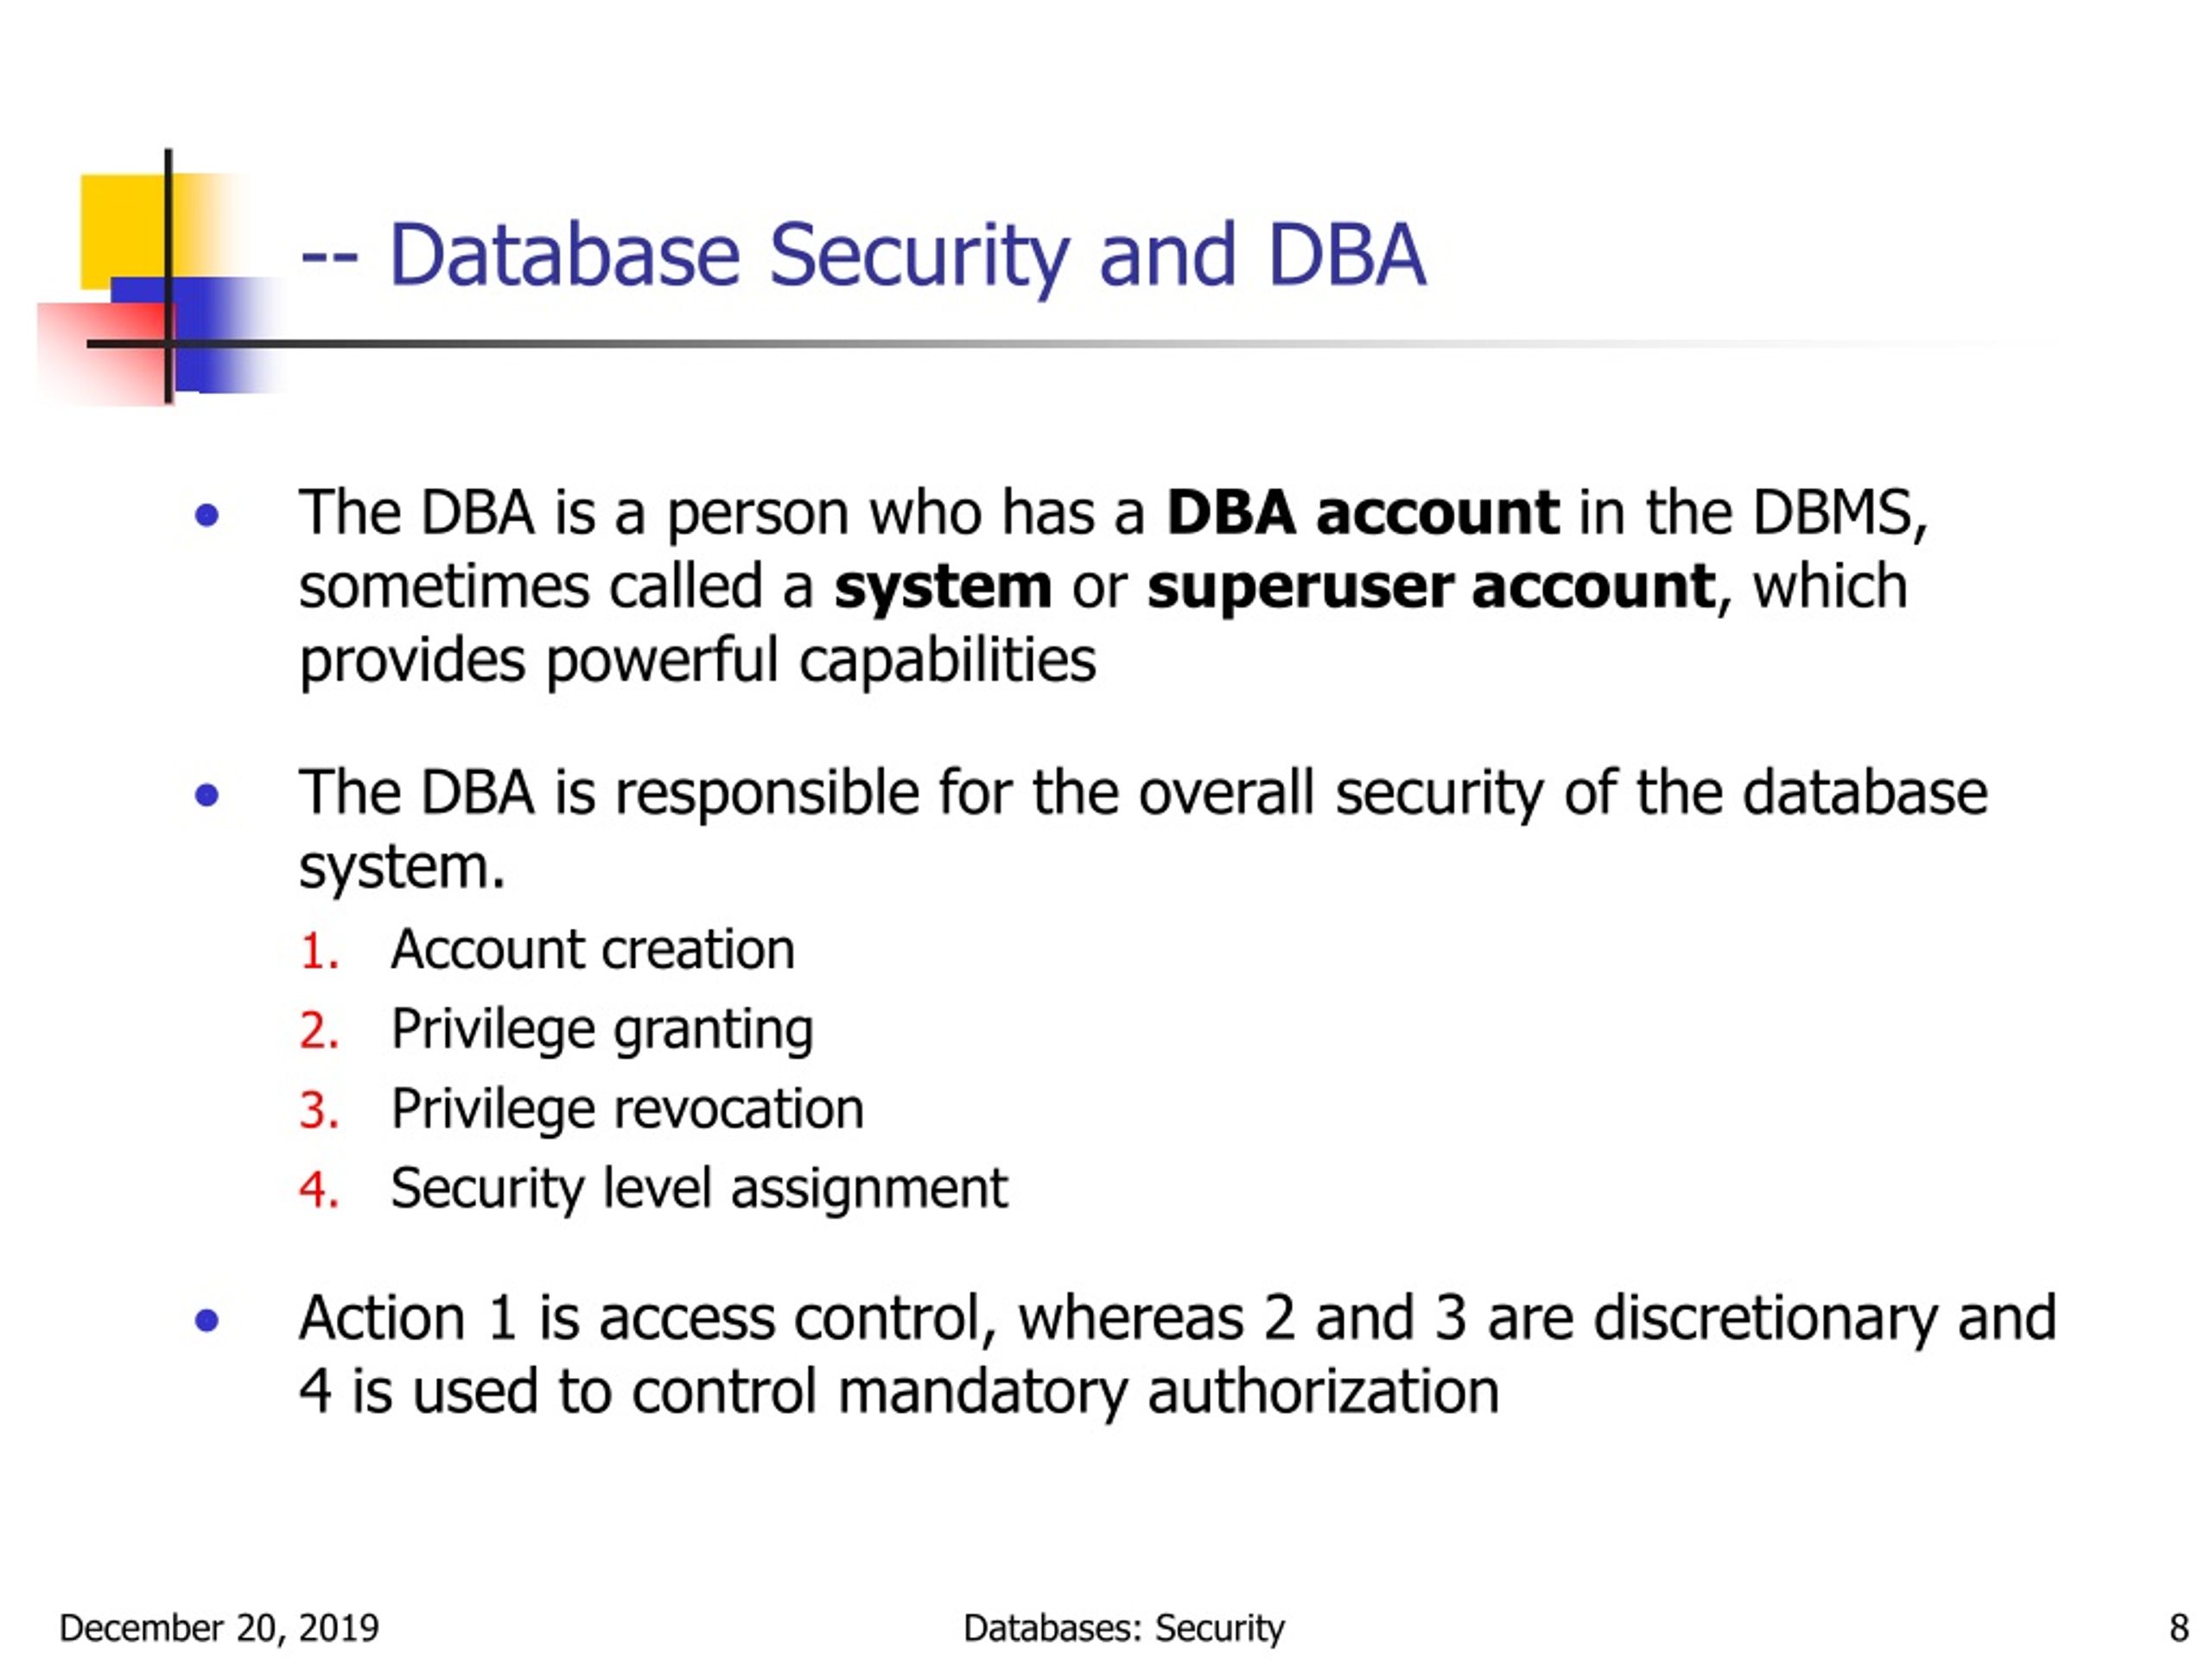 Ppt Database Security And Authorization Powerpoint Presentation Free Download Id9154344 9410